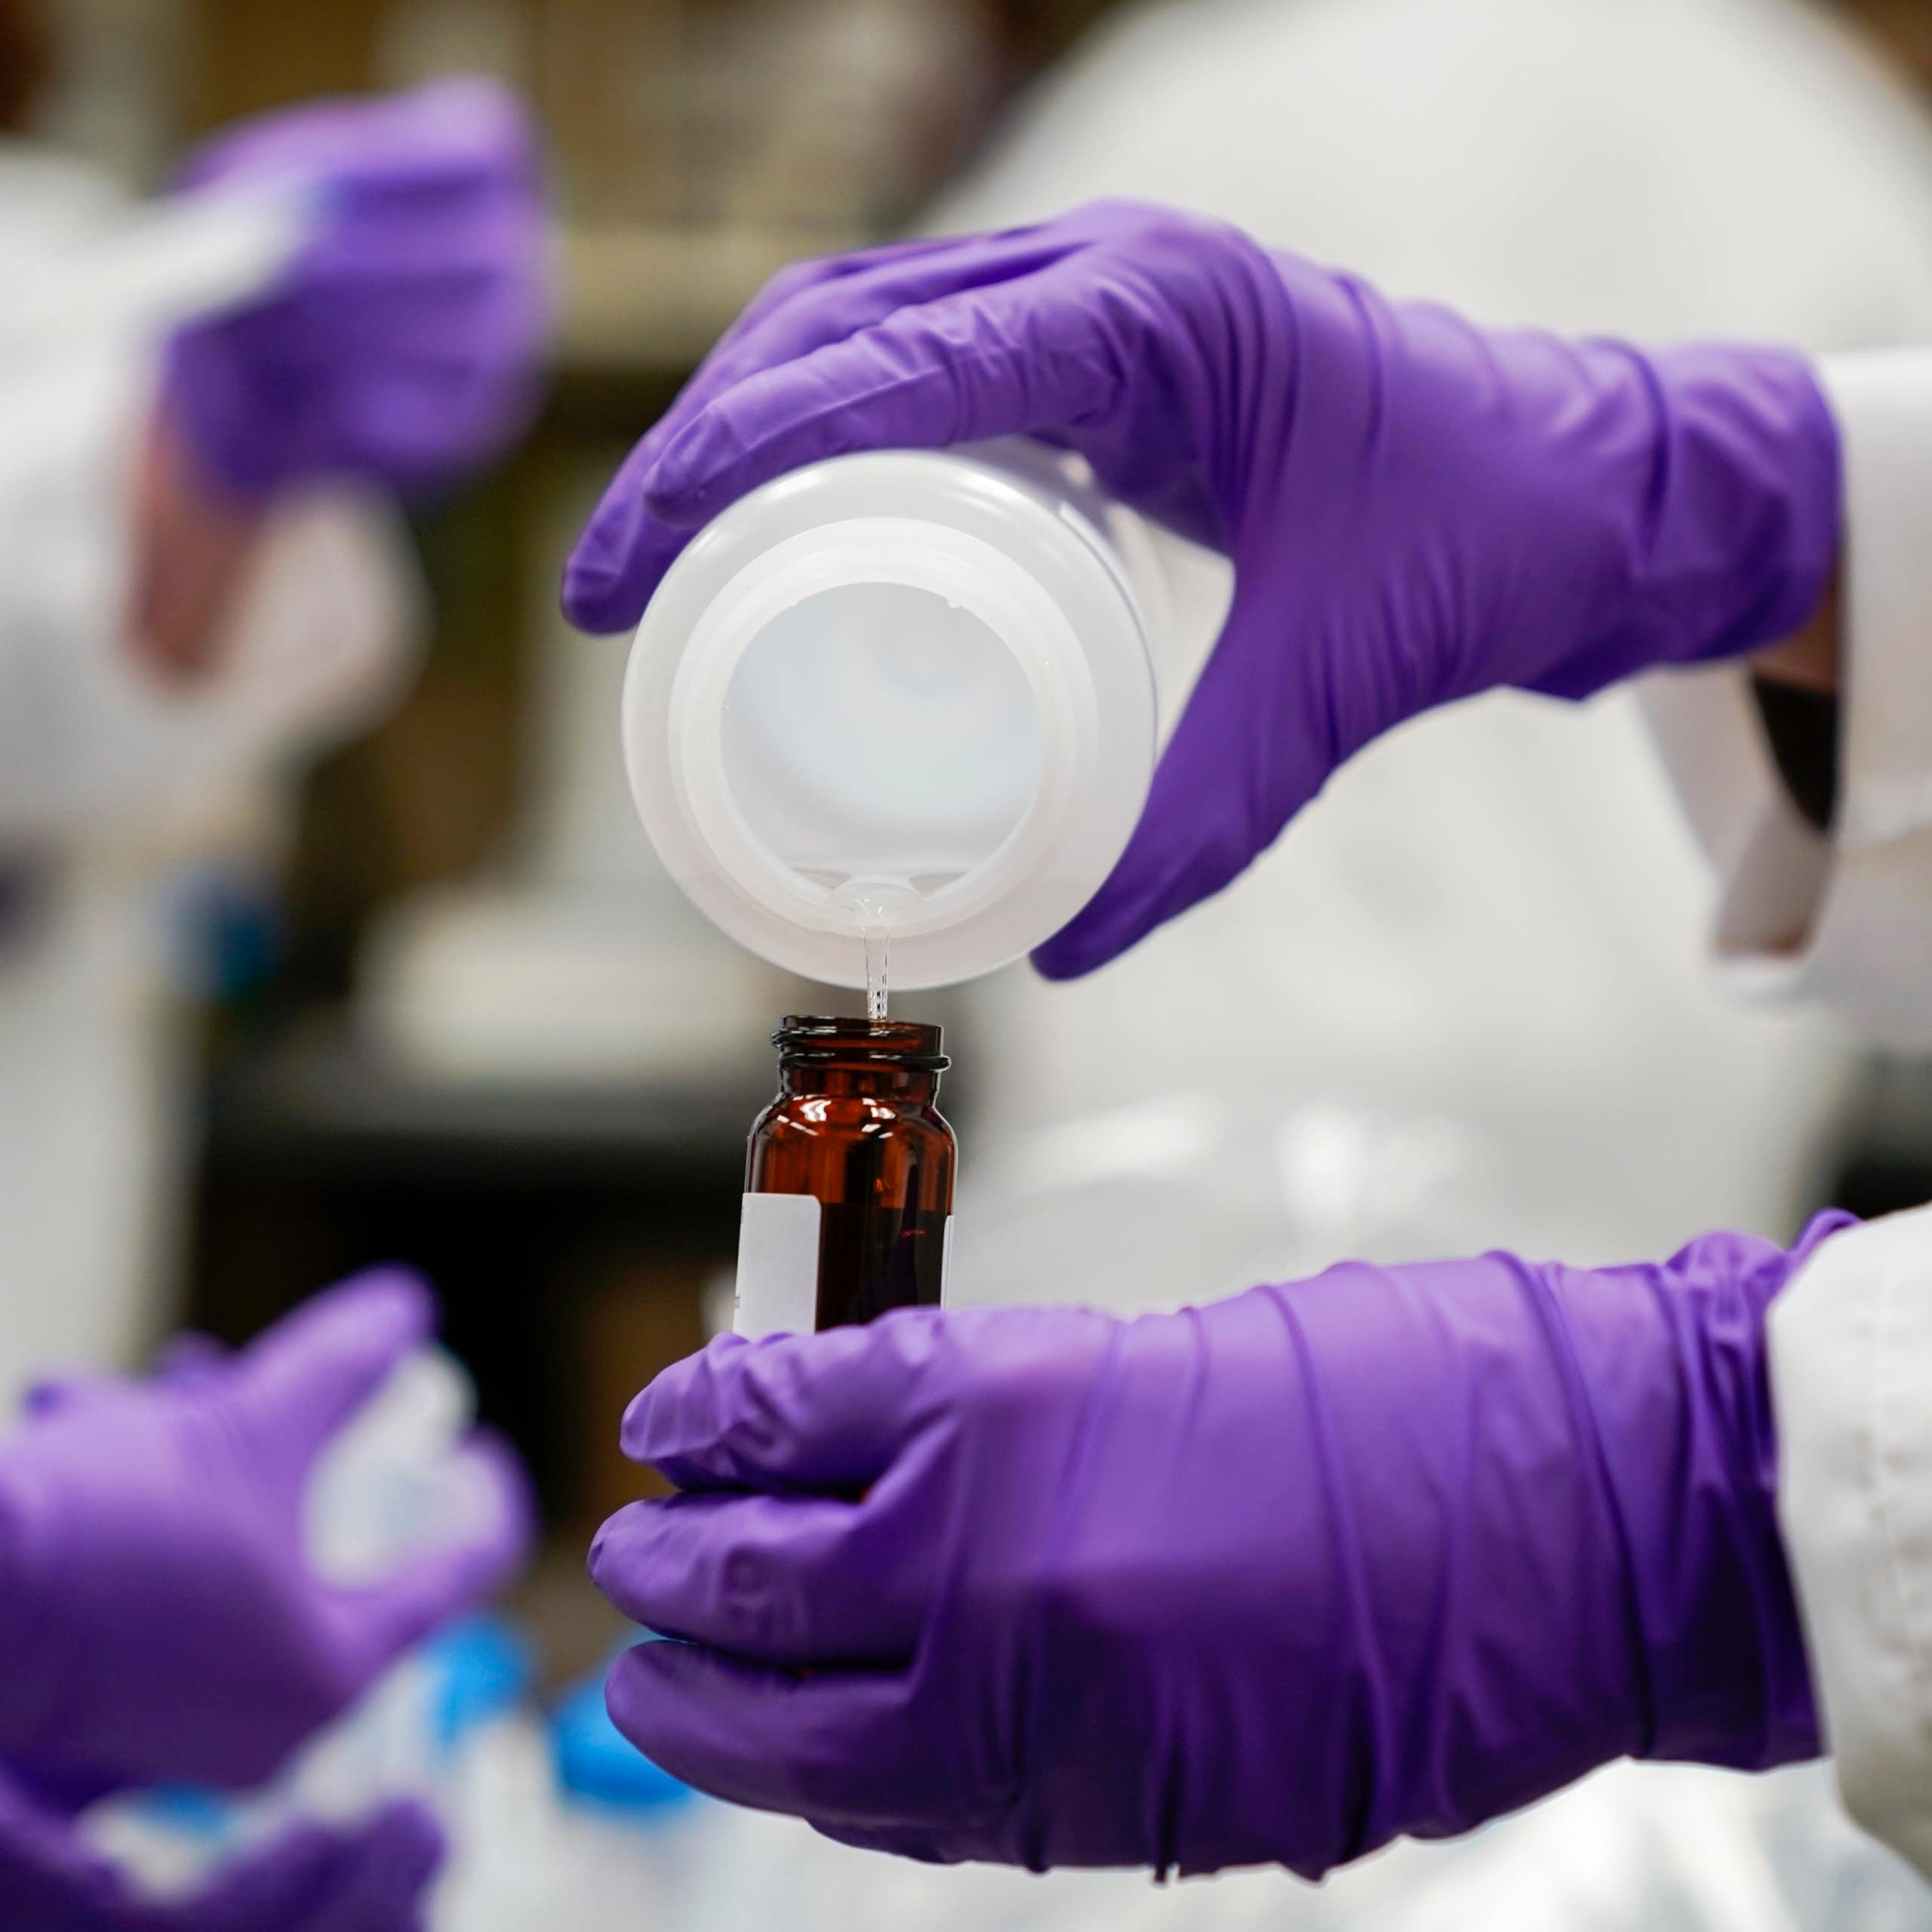 Hands in purple gloves pour a water sample into a bottle for testing.